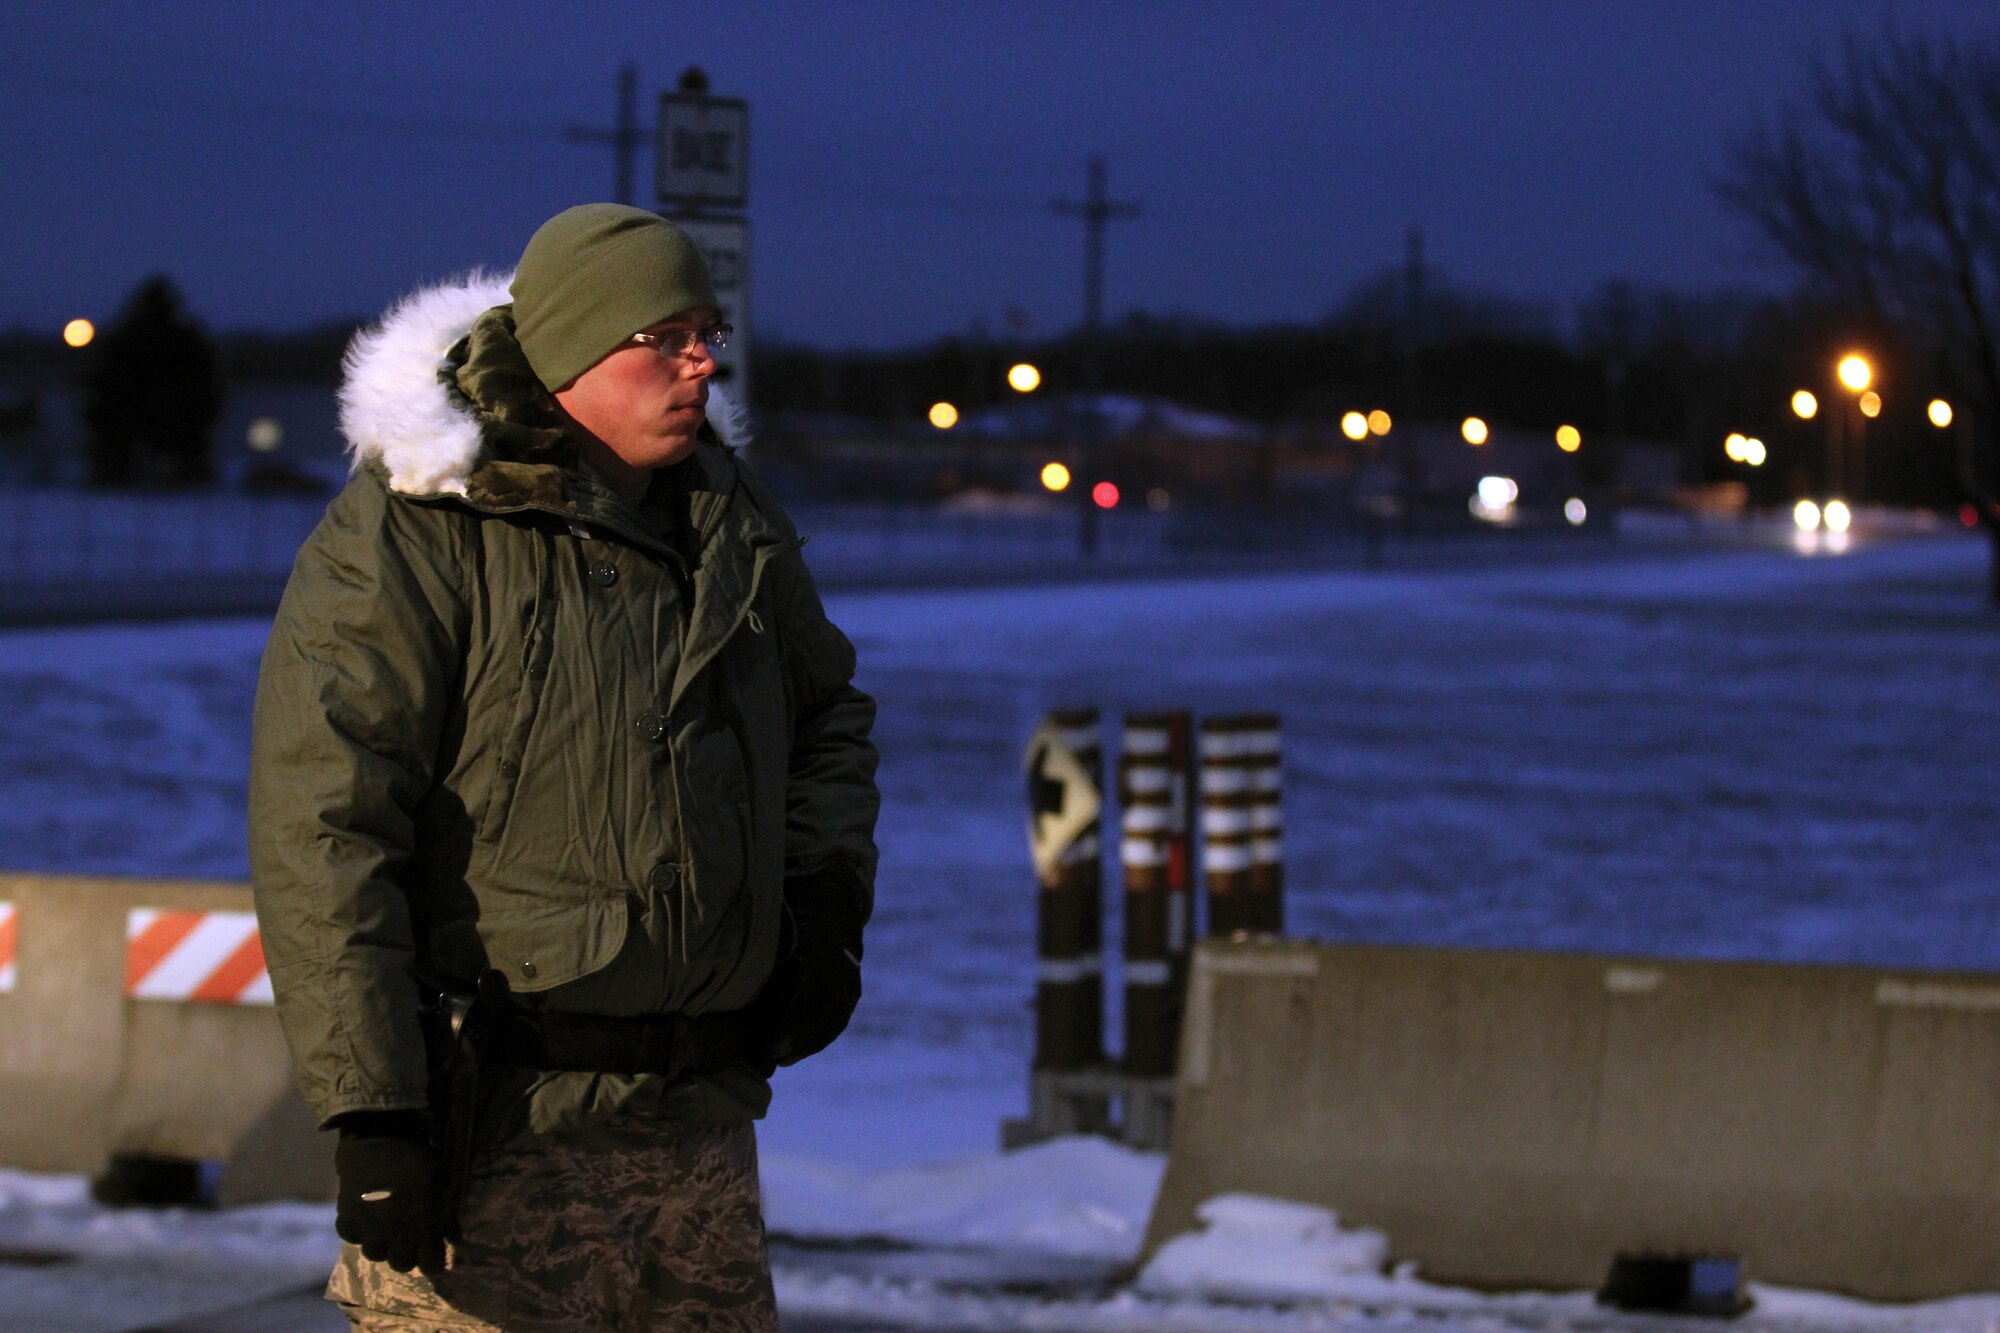 WRIGHT-PATTERSON AIR FORCE BASE, Ohio – Senior Airman Robert Cole, 445th Security Forces Squadron, is dressed for the 4 below zero temperature while waiting for the next vehicle to come through Gate 26A during the Jan. 11, 2015 445th Airlift Wing unit training assembly. (U.S. Air Force photo/Tech. Sgt. Patrick O'Reilly)